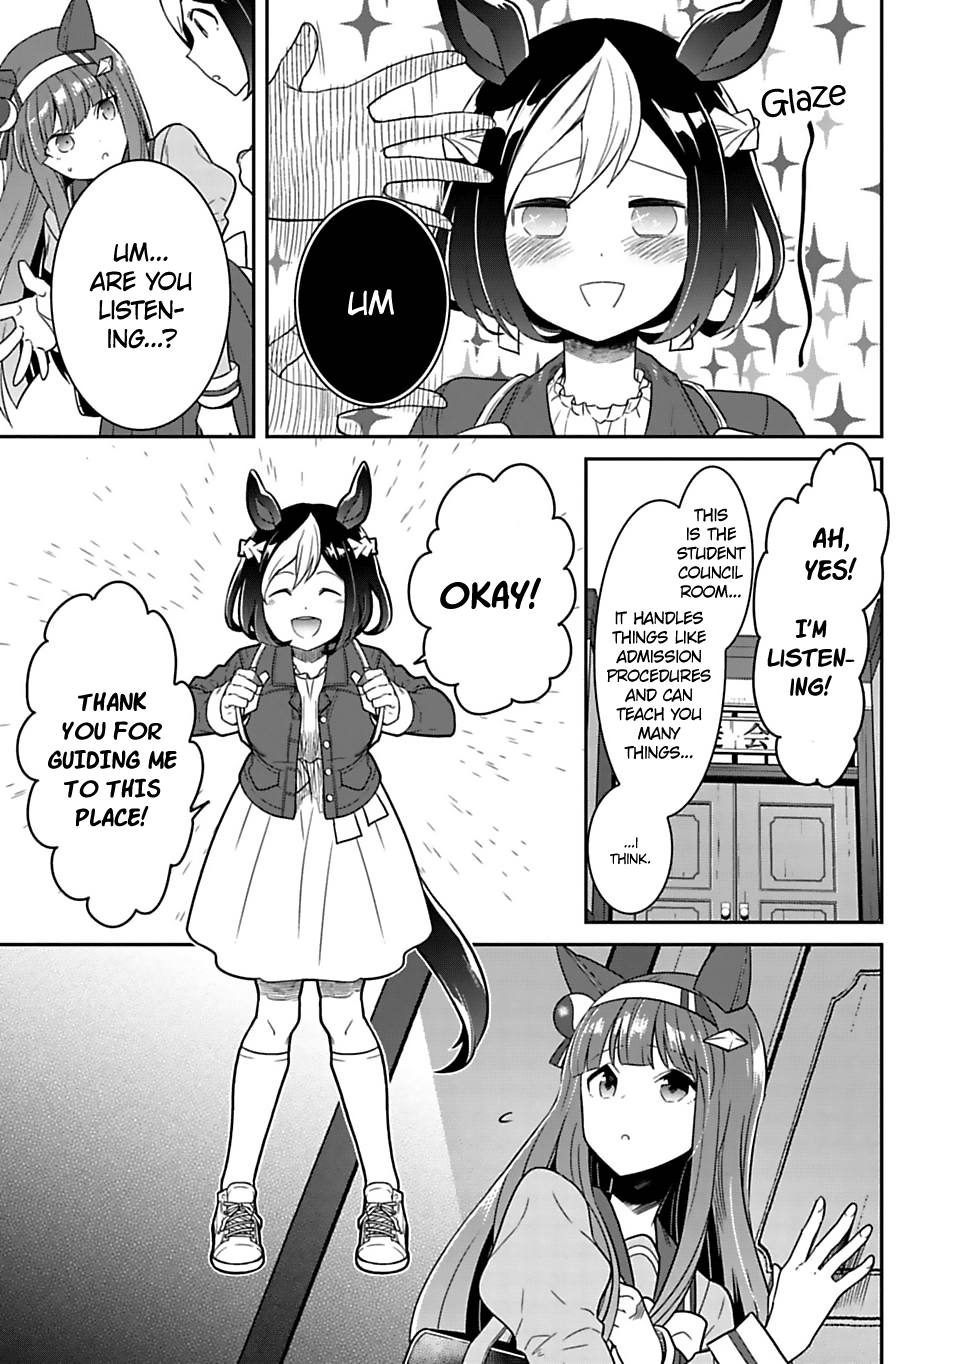 Starting Gate! Uma Musume Pretty Derby Vol.1 Chapter 2: Special Today! #02 - Picture 3